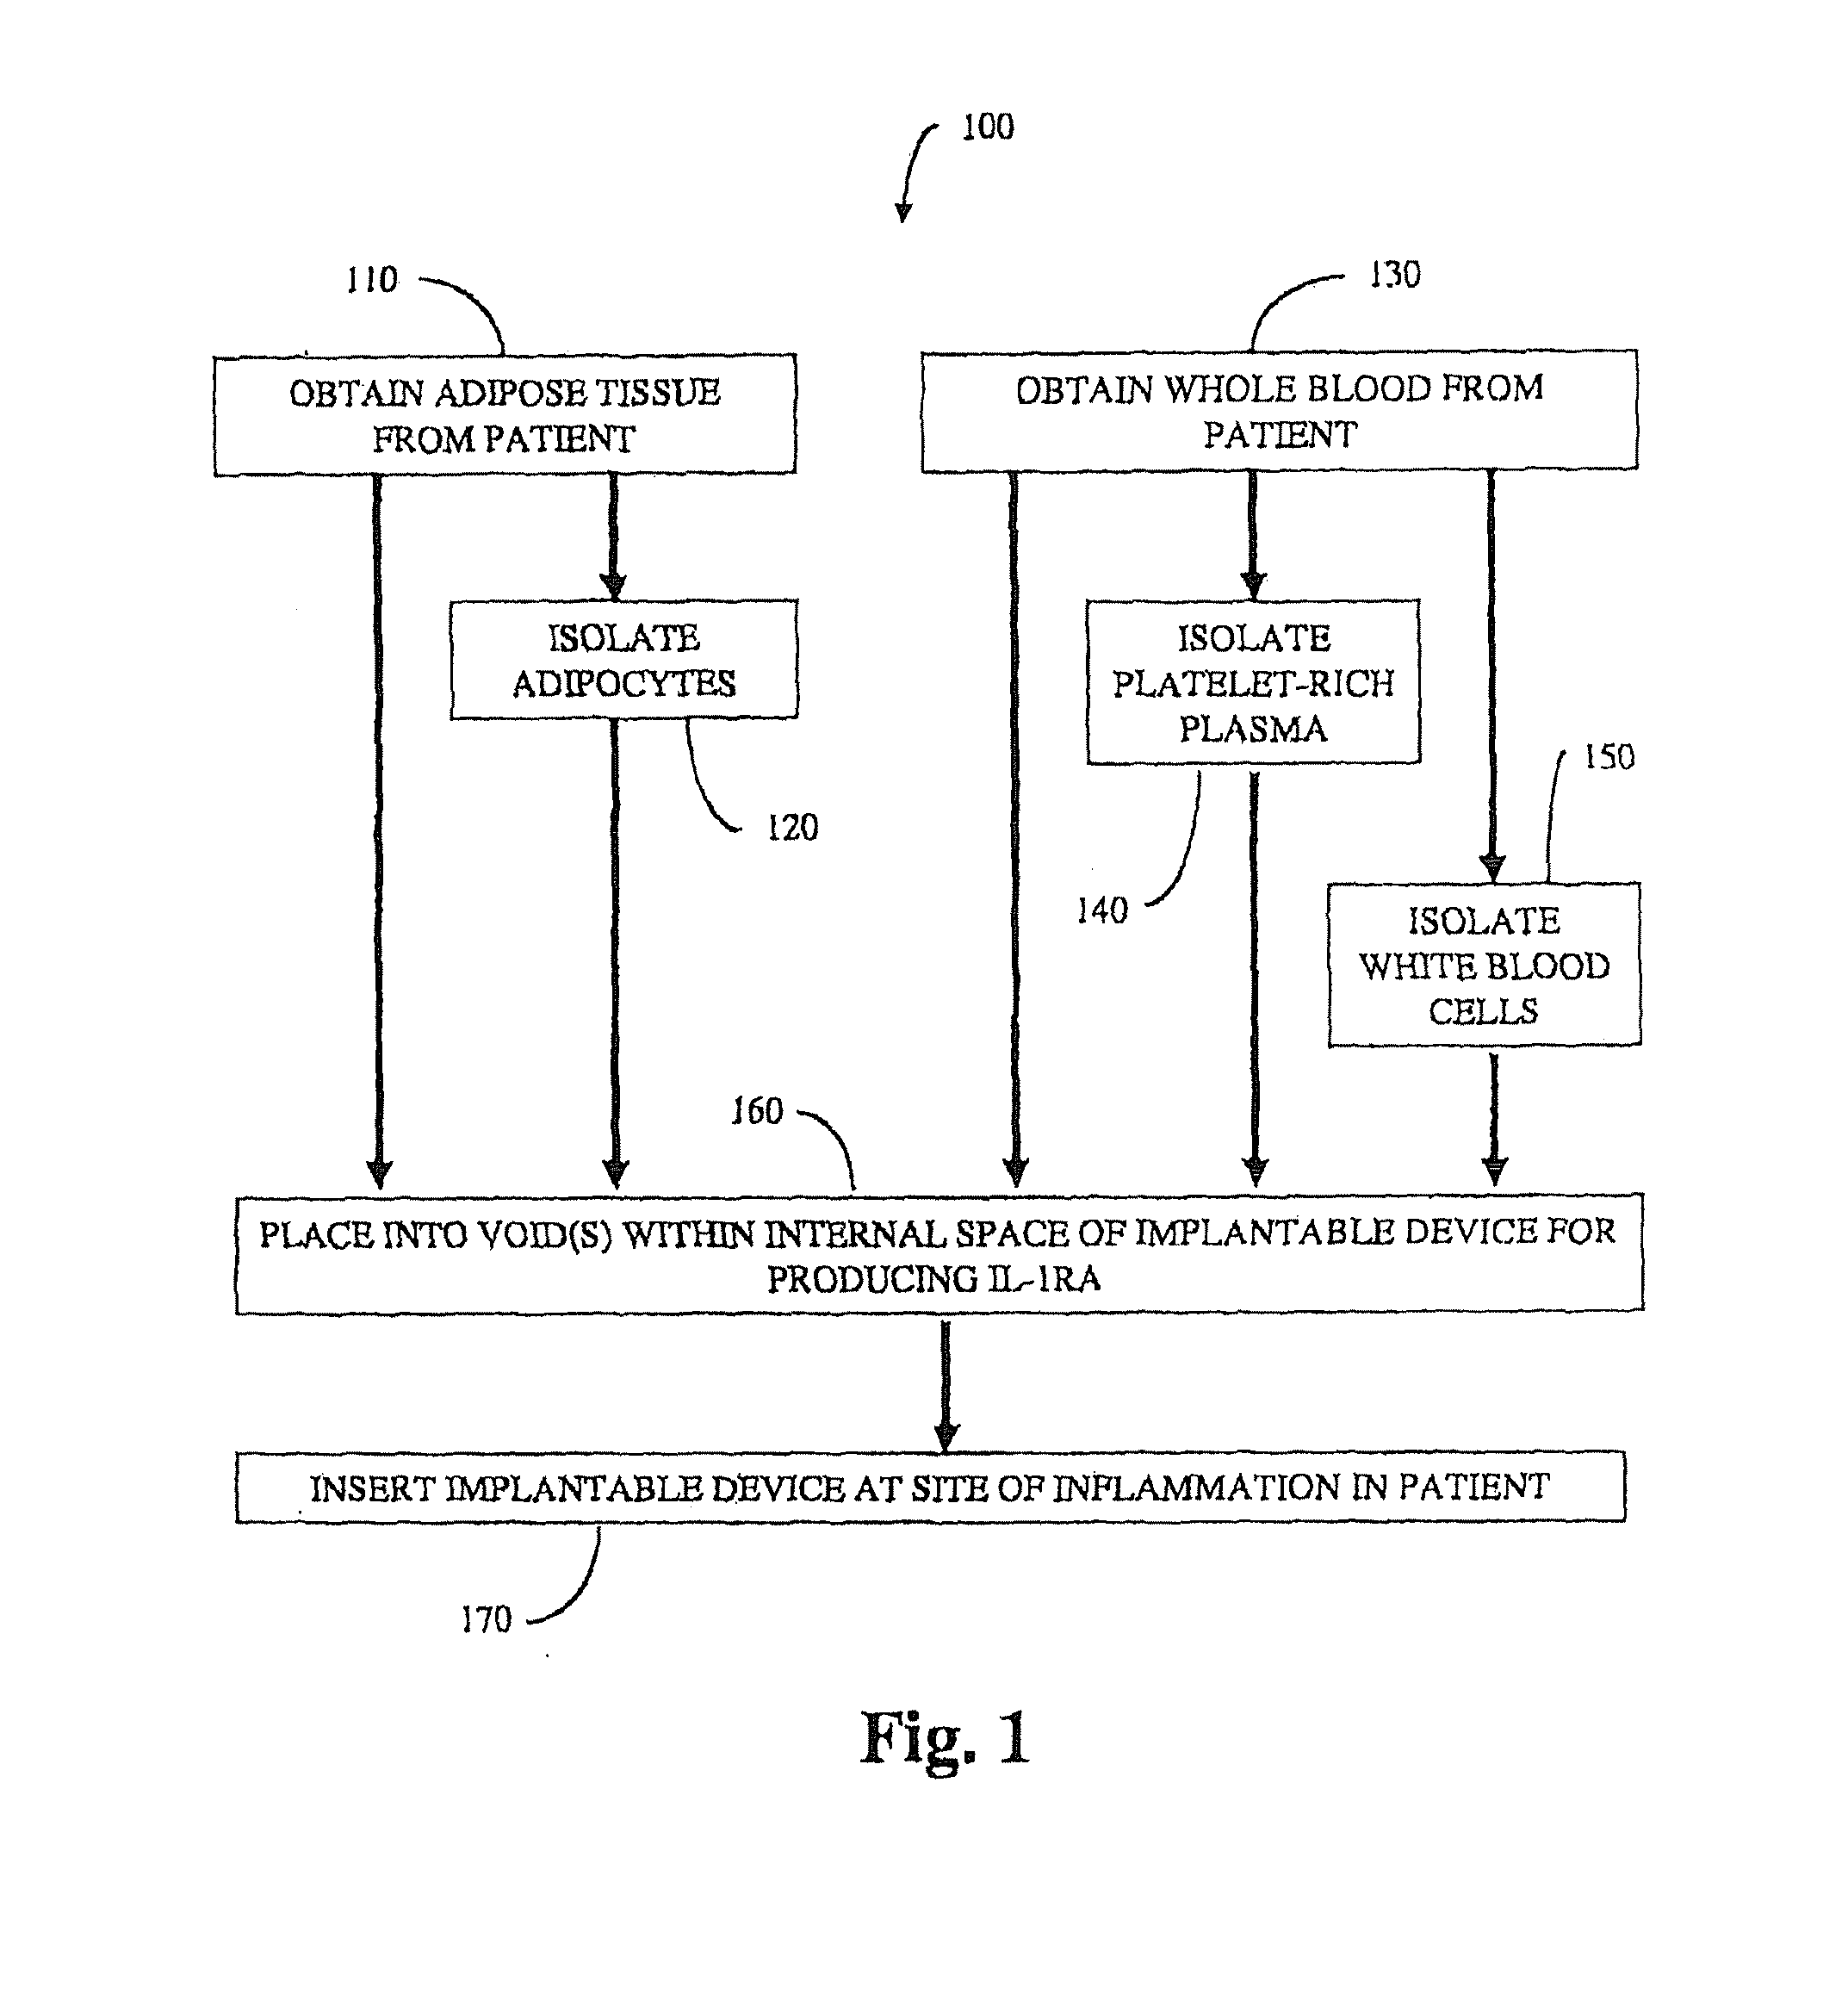 Implantable device for production of interleukin-1 receptor antagonist